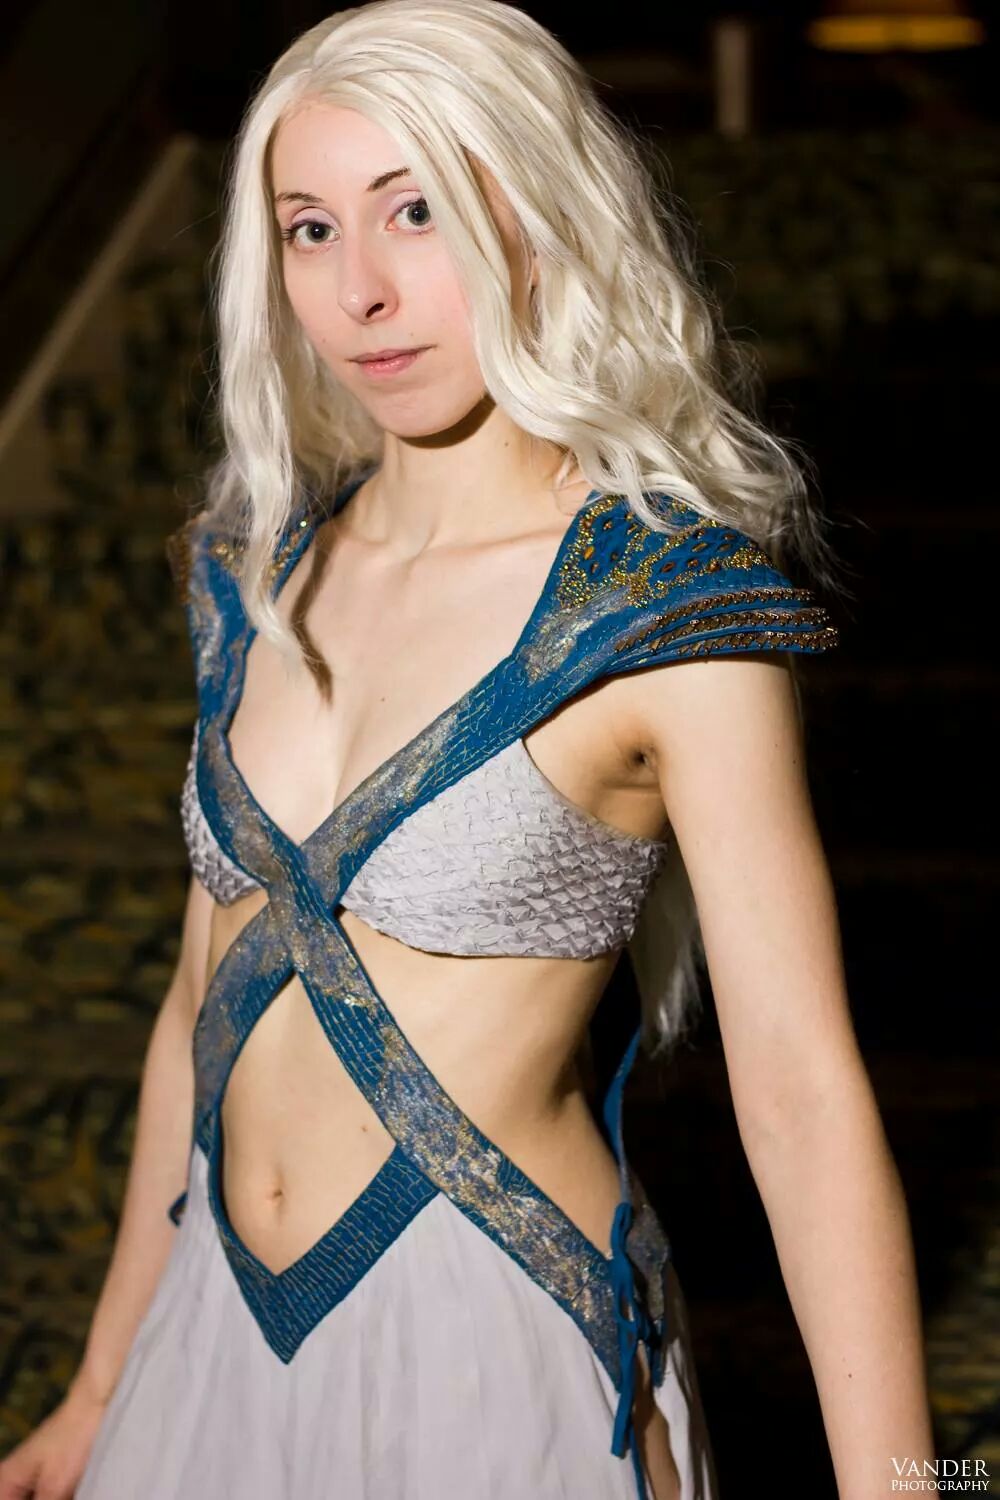 Cospix.net photo featuring Mhysa Cosplay